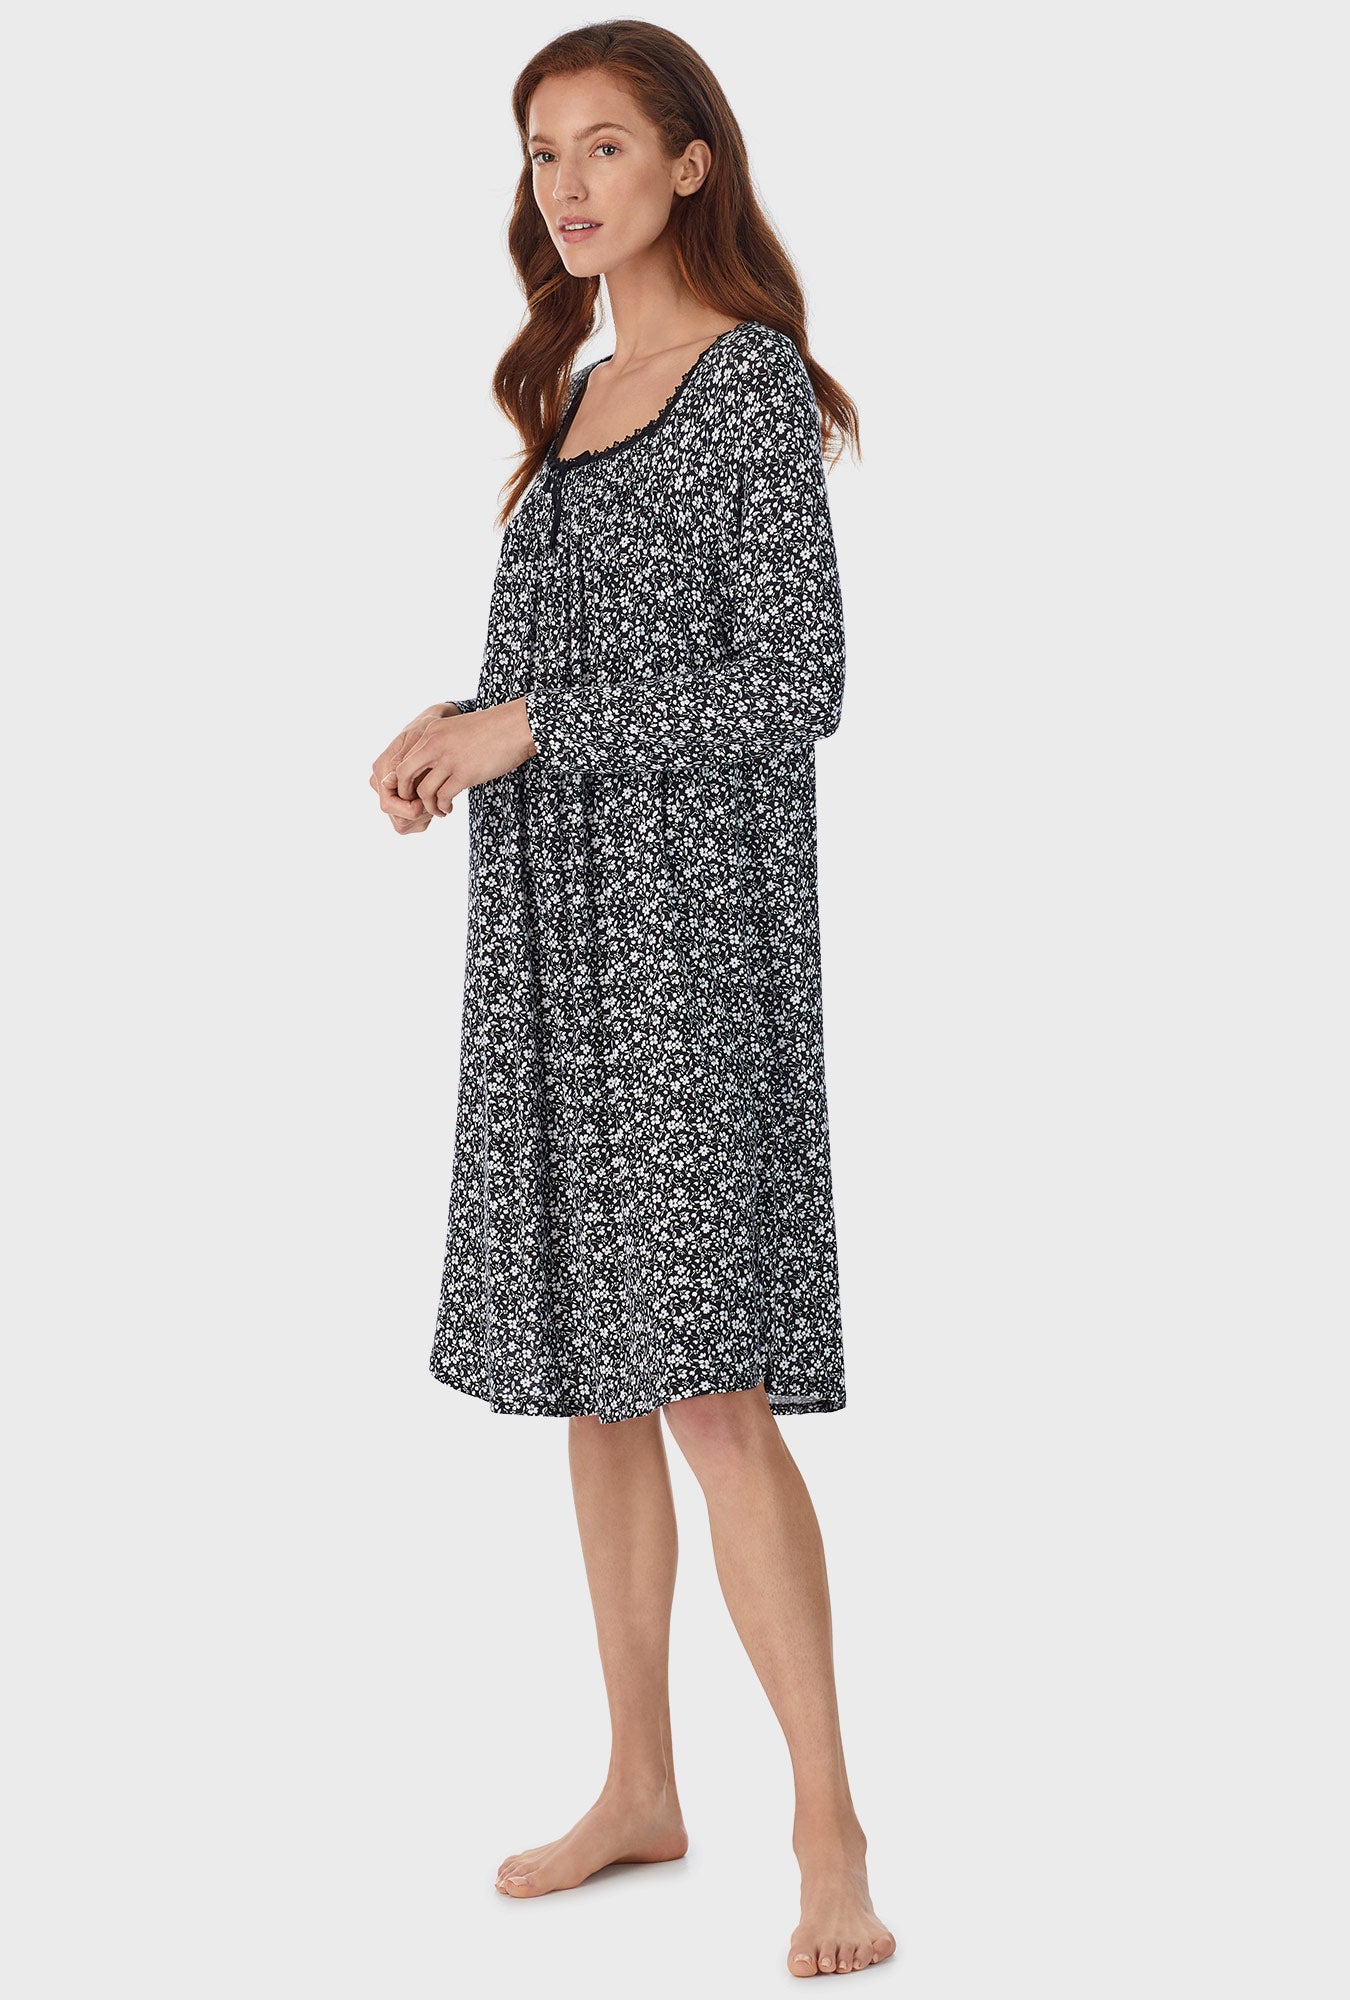  A lady wearing black waltz nightgown with midnight ditsy print